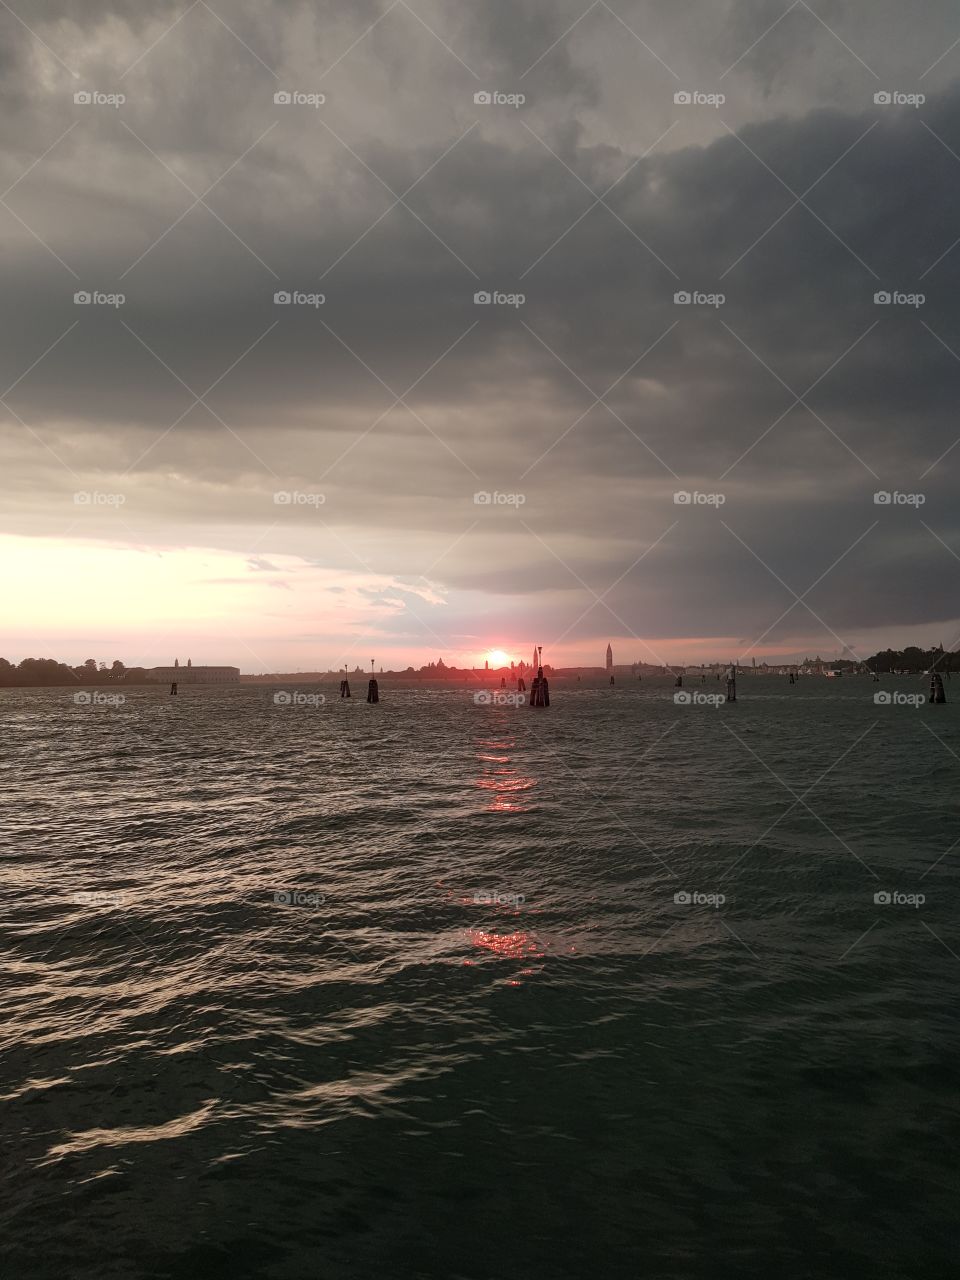 the beautiful sunset in Venice, very romantic and passionate, the city of love, perfect for valentines day and for couoles who fall in love. this is Venezia!